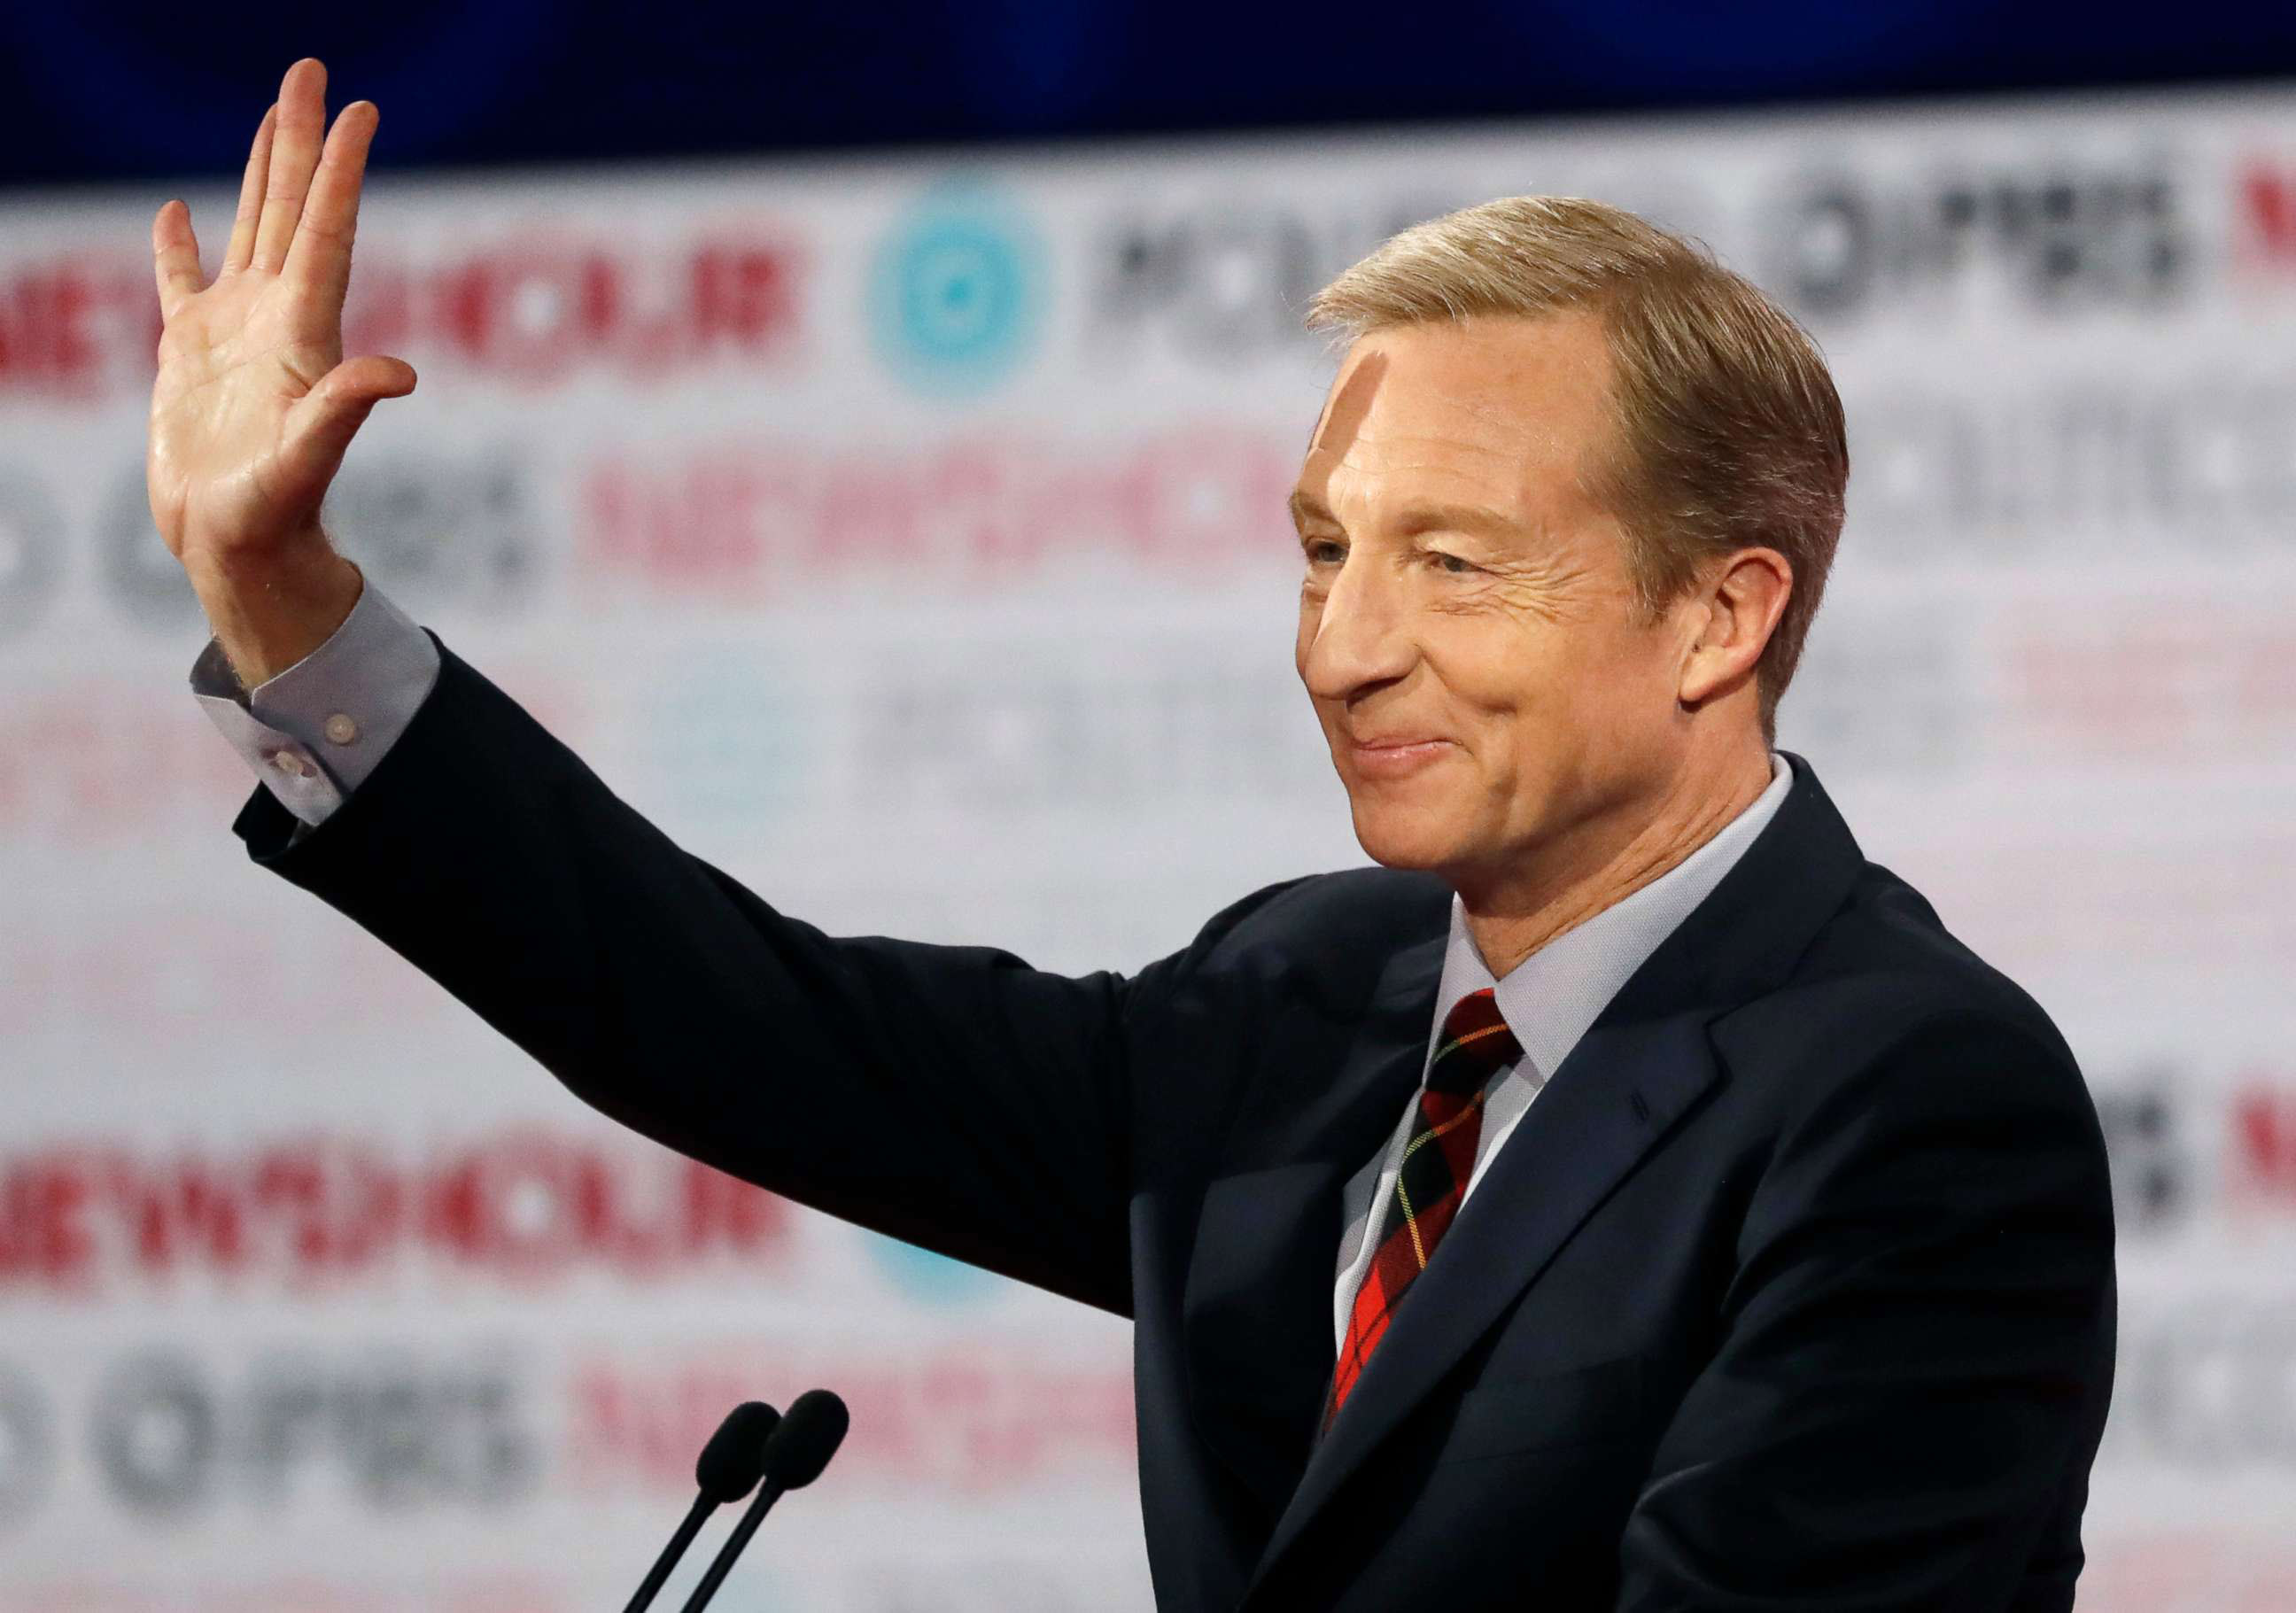 PHOTO: In this Dec. 19, 2019, file photo, Democratic presidential candidate businessman Tom Steyer waves before a Democratic presidential primary debate in Los Angeles, Calif.